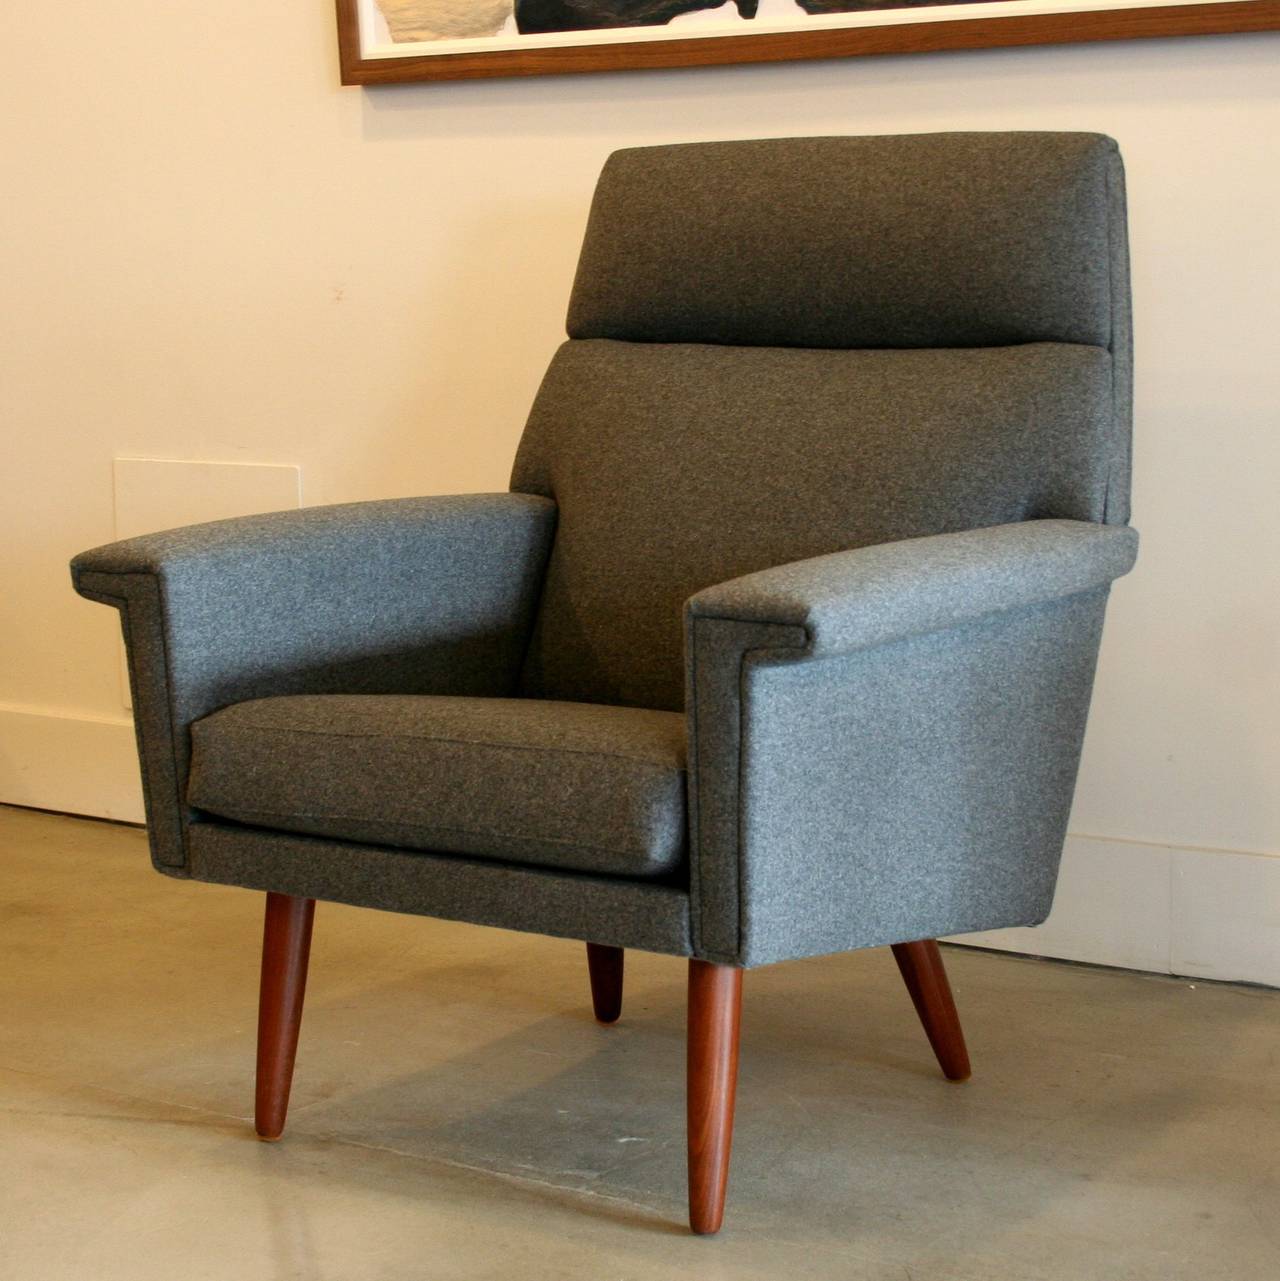 Timeless mid-century design, this stunning armchair has been newly reupholstered in grey felted wool. High tight back frame with finned arms and loose cushion seat. Resting on solid teak conical legs